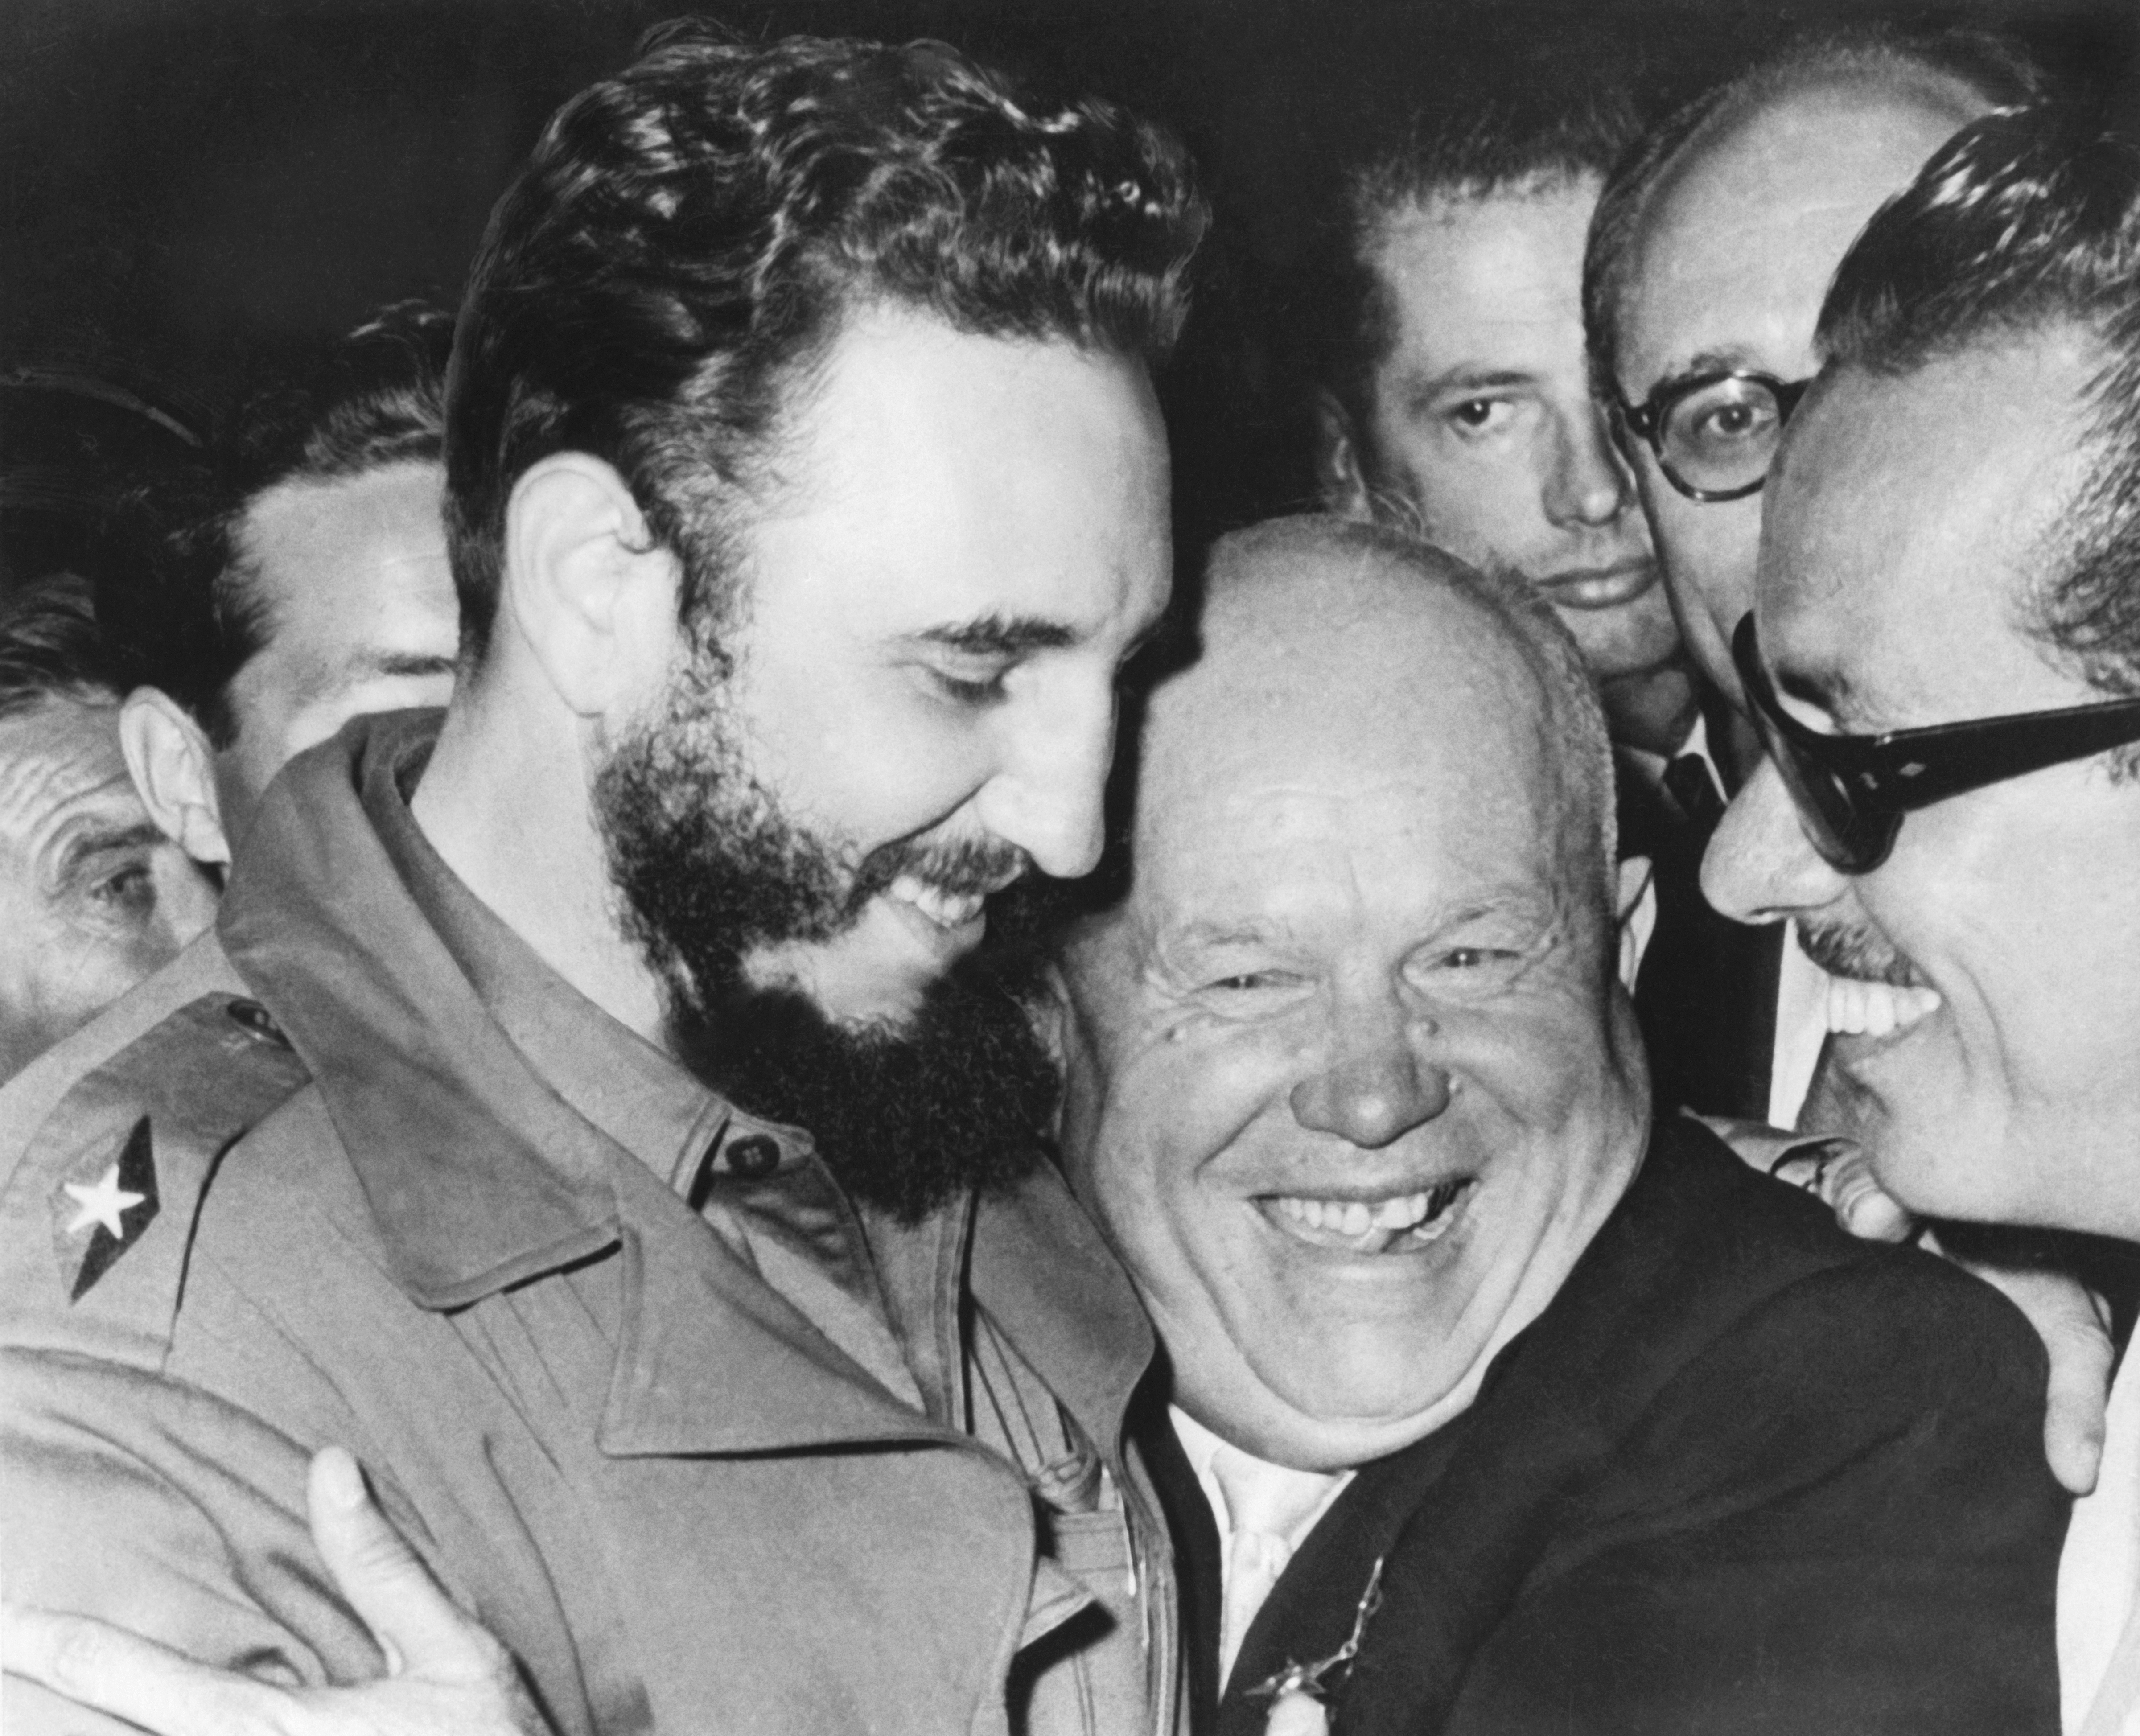 A jovial greeting takes place between Cuba's Prime MInister Fidel Castro and Soviet Union's Premier Nikita Khrushchev when they met at the United Nations today, New York, New York, September 20, 1960. (Photo by Underwood Archives/Getty Images)